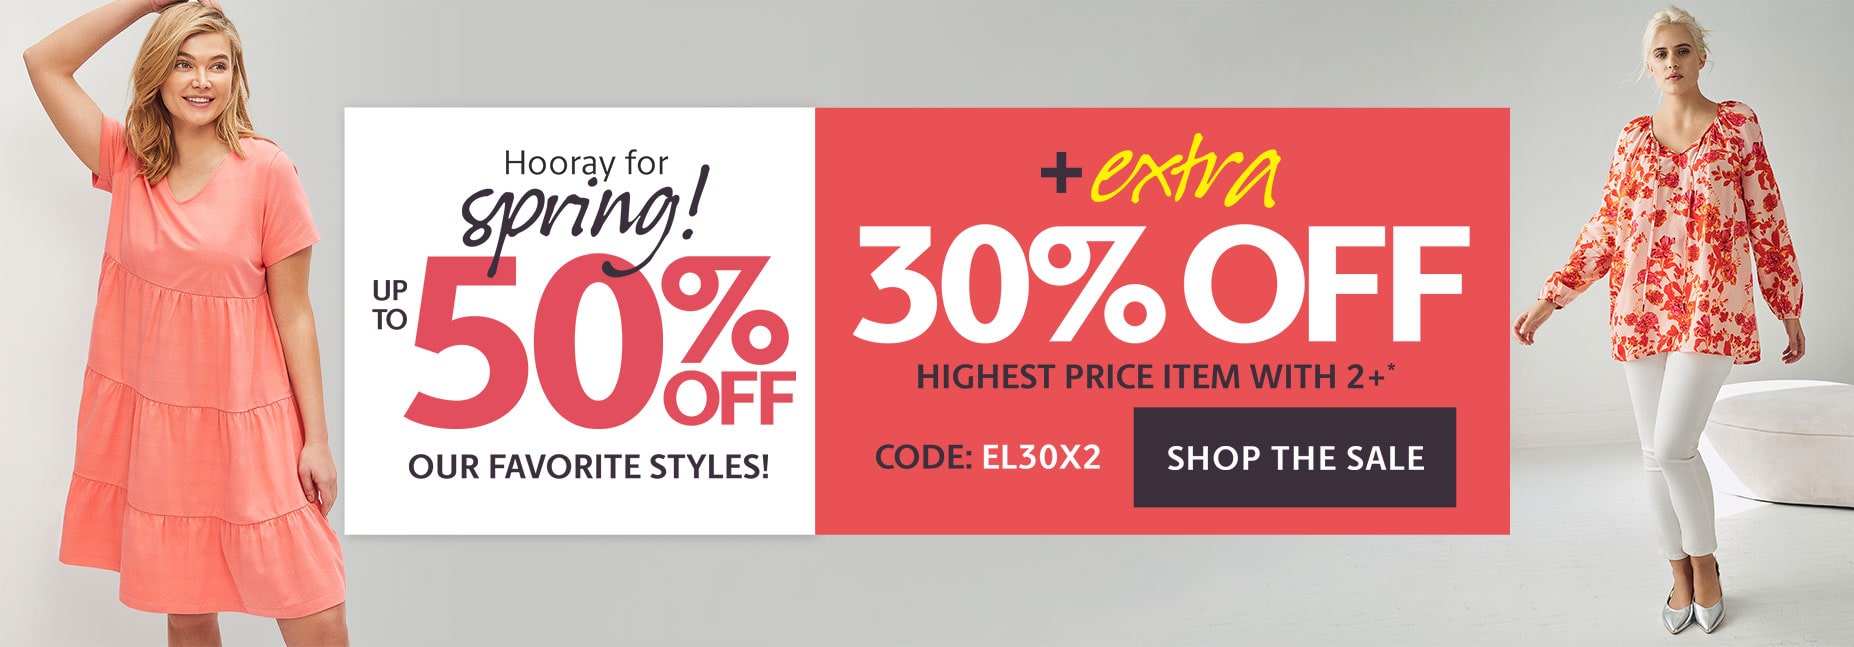 Up to 50% Off Favorite Styles